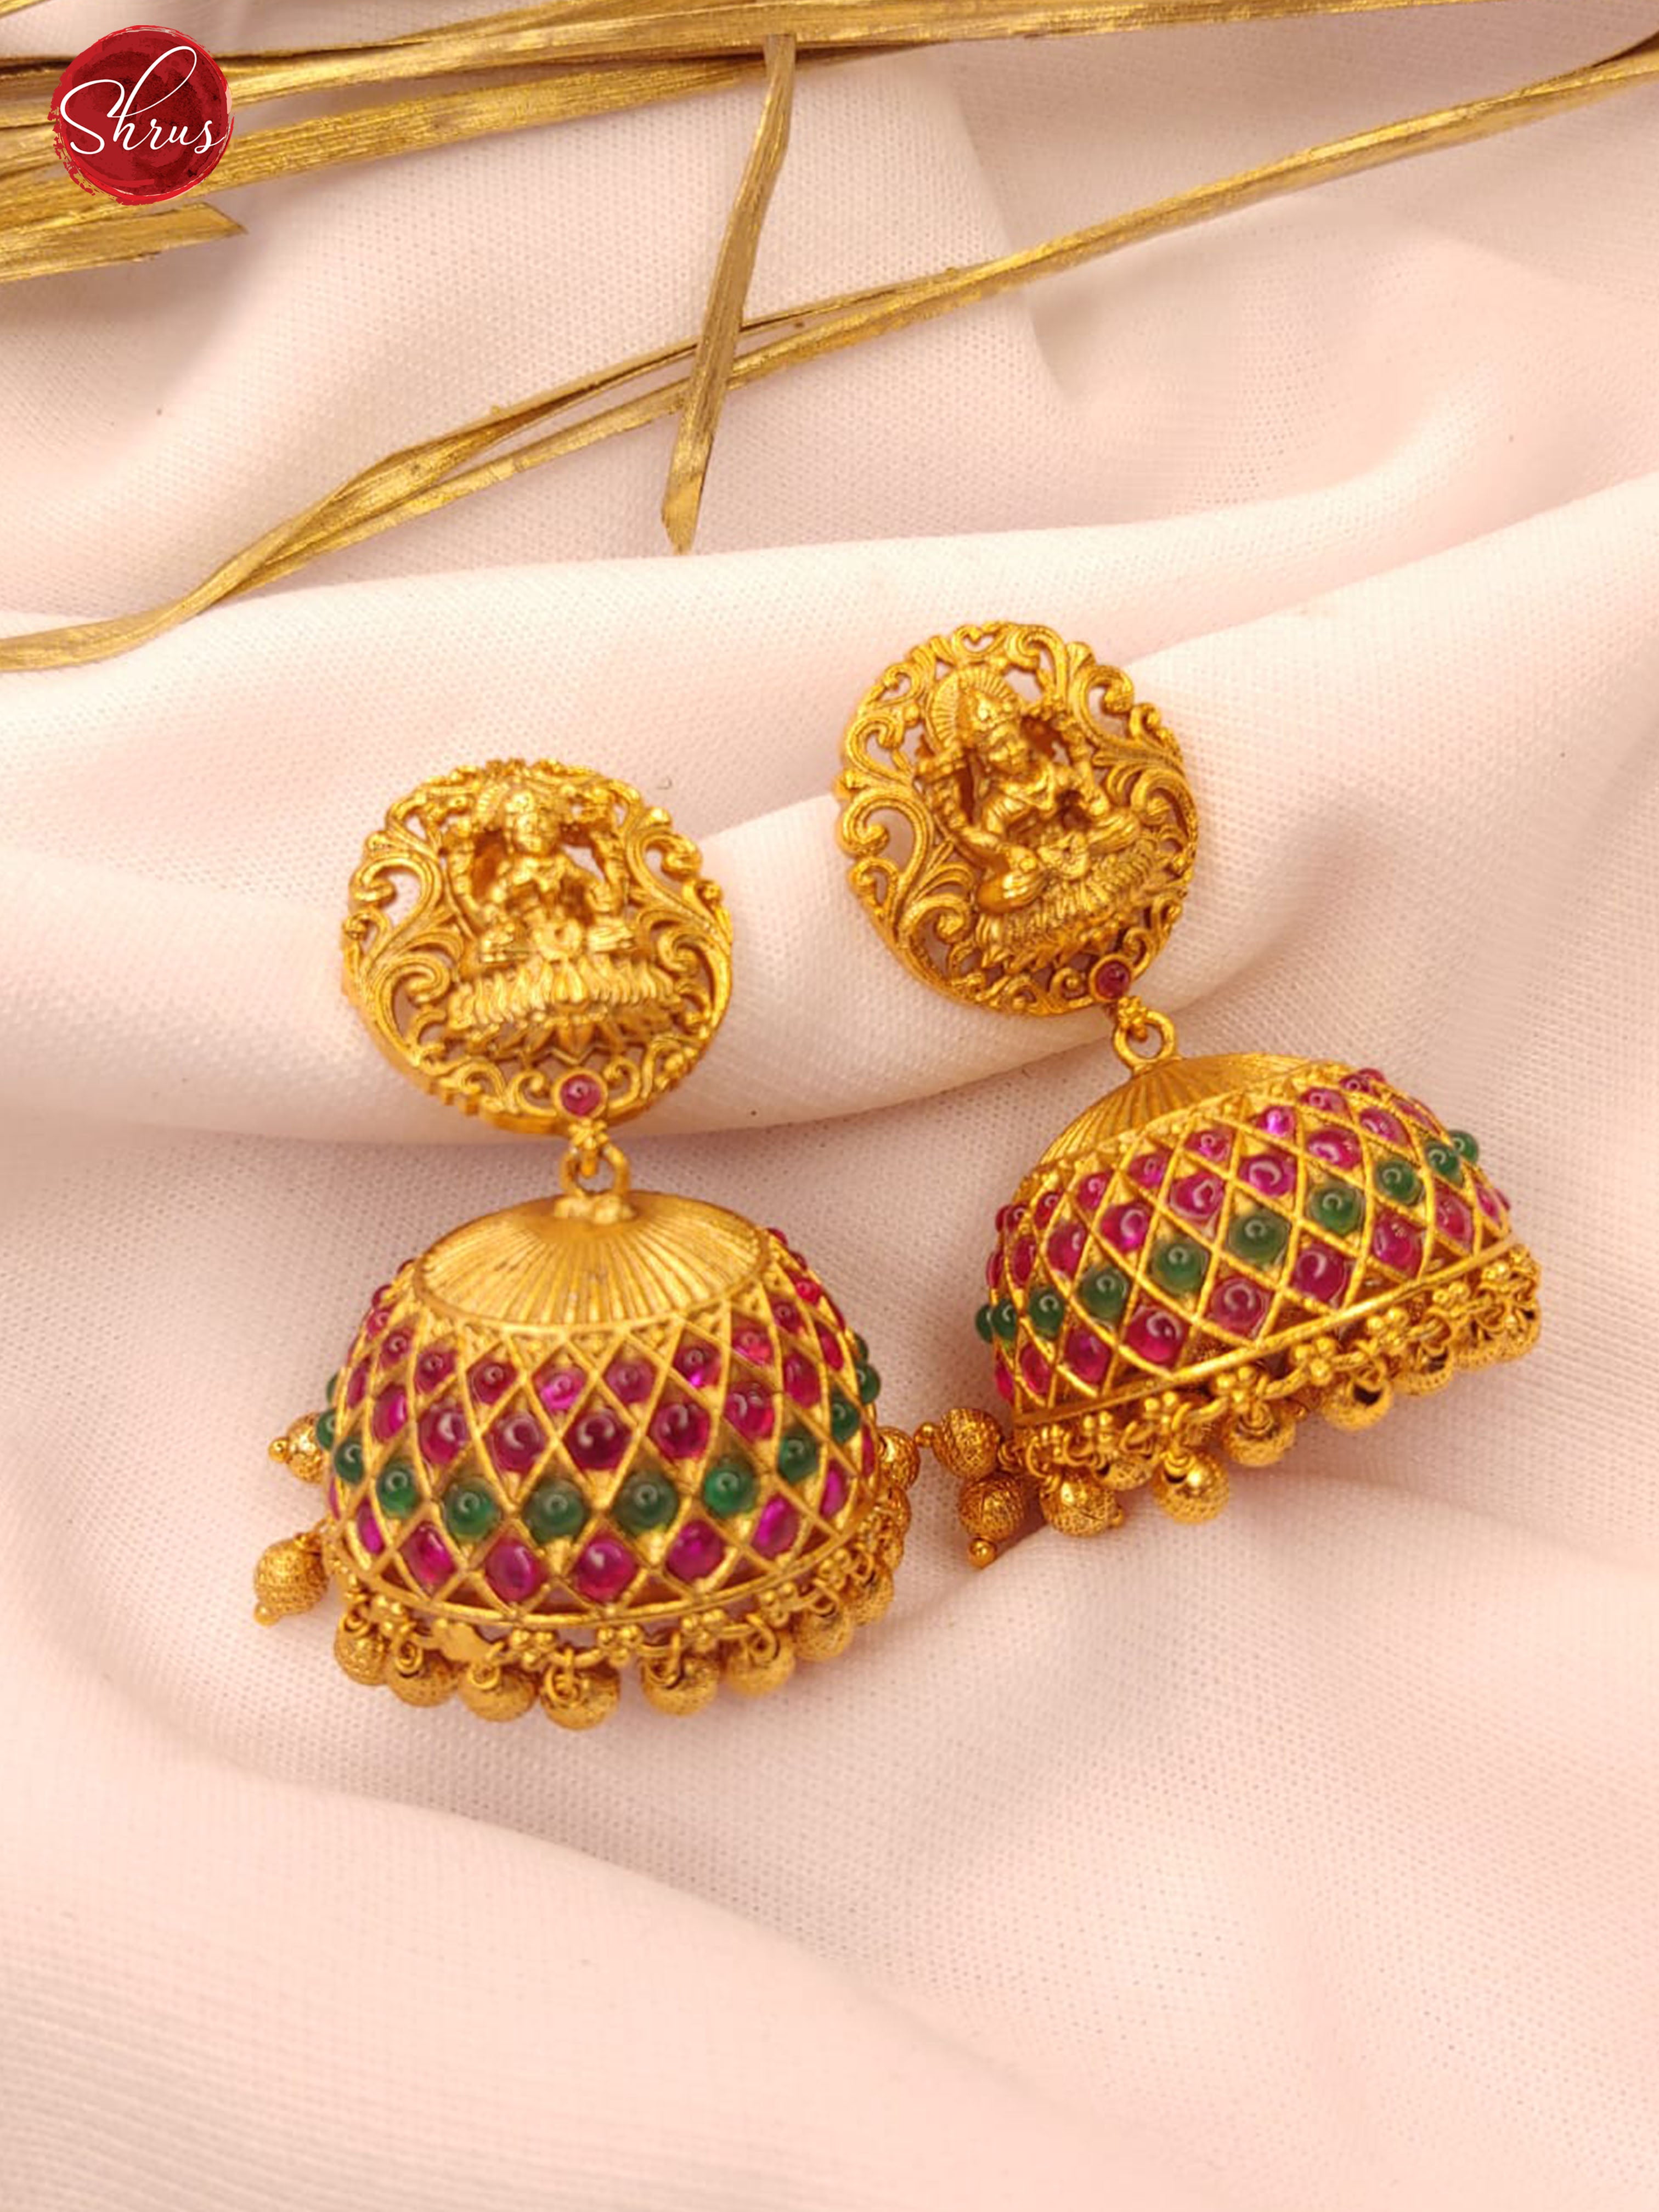 ACCESSORIES - EARRINGS (ARTIFICIAL) - Shop on ShrusEternity.com